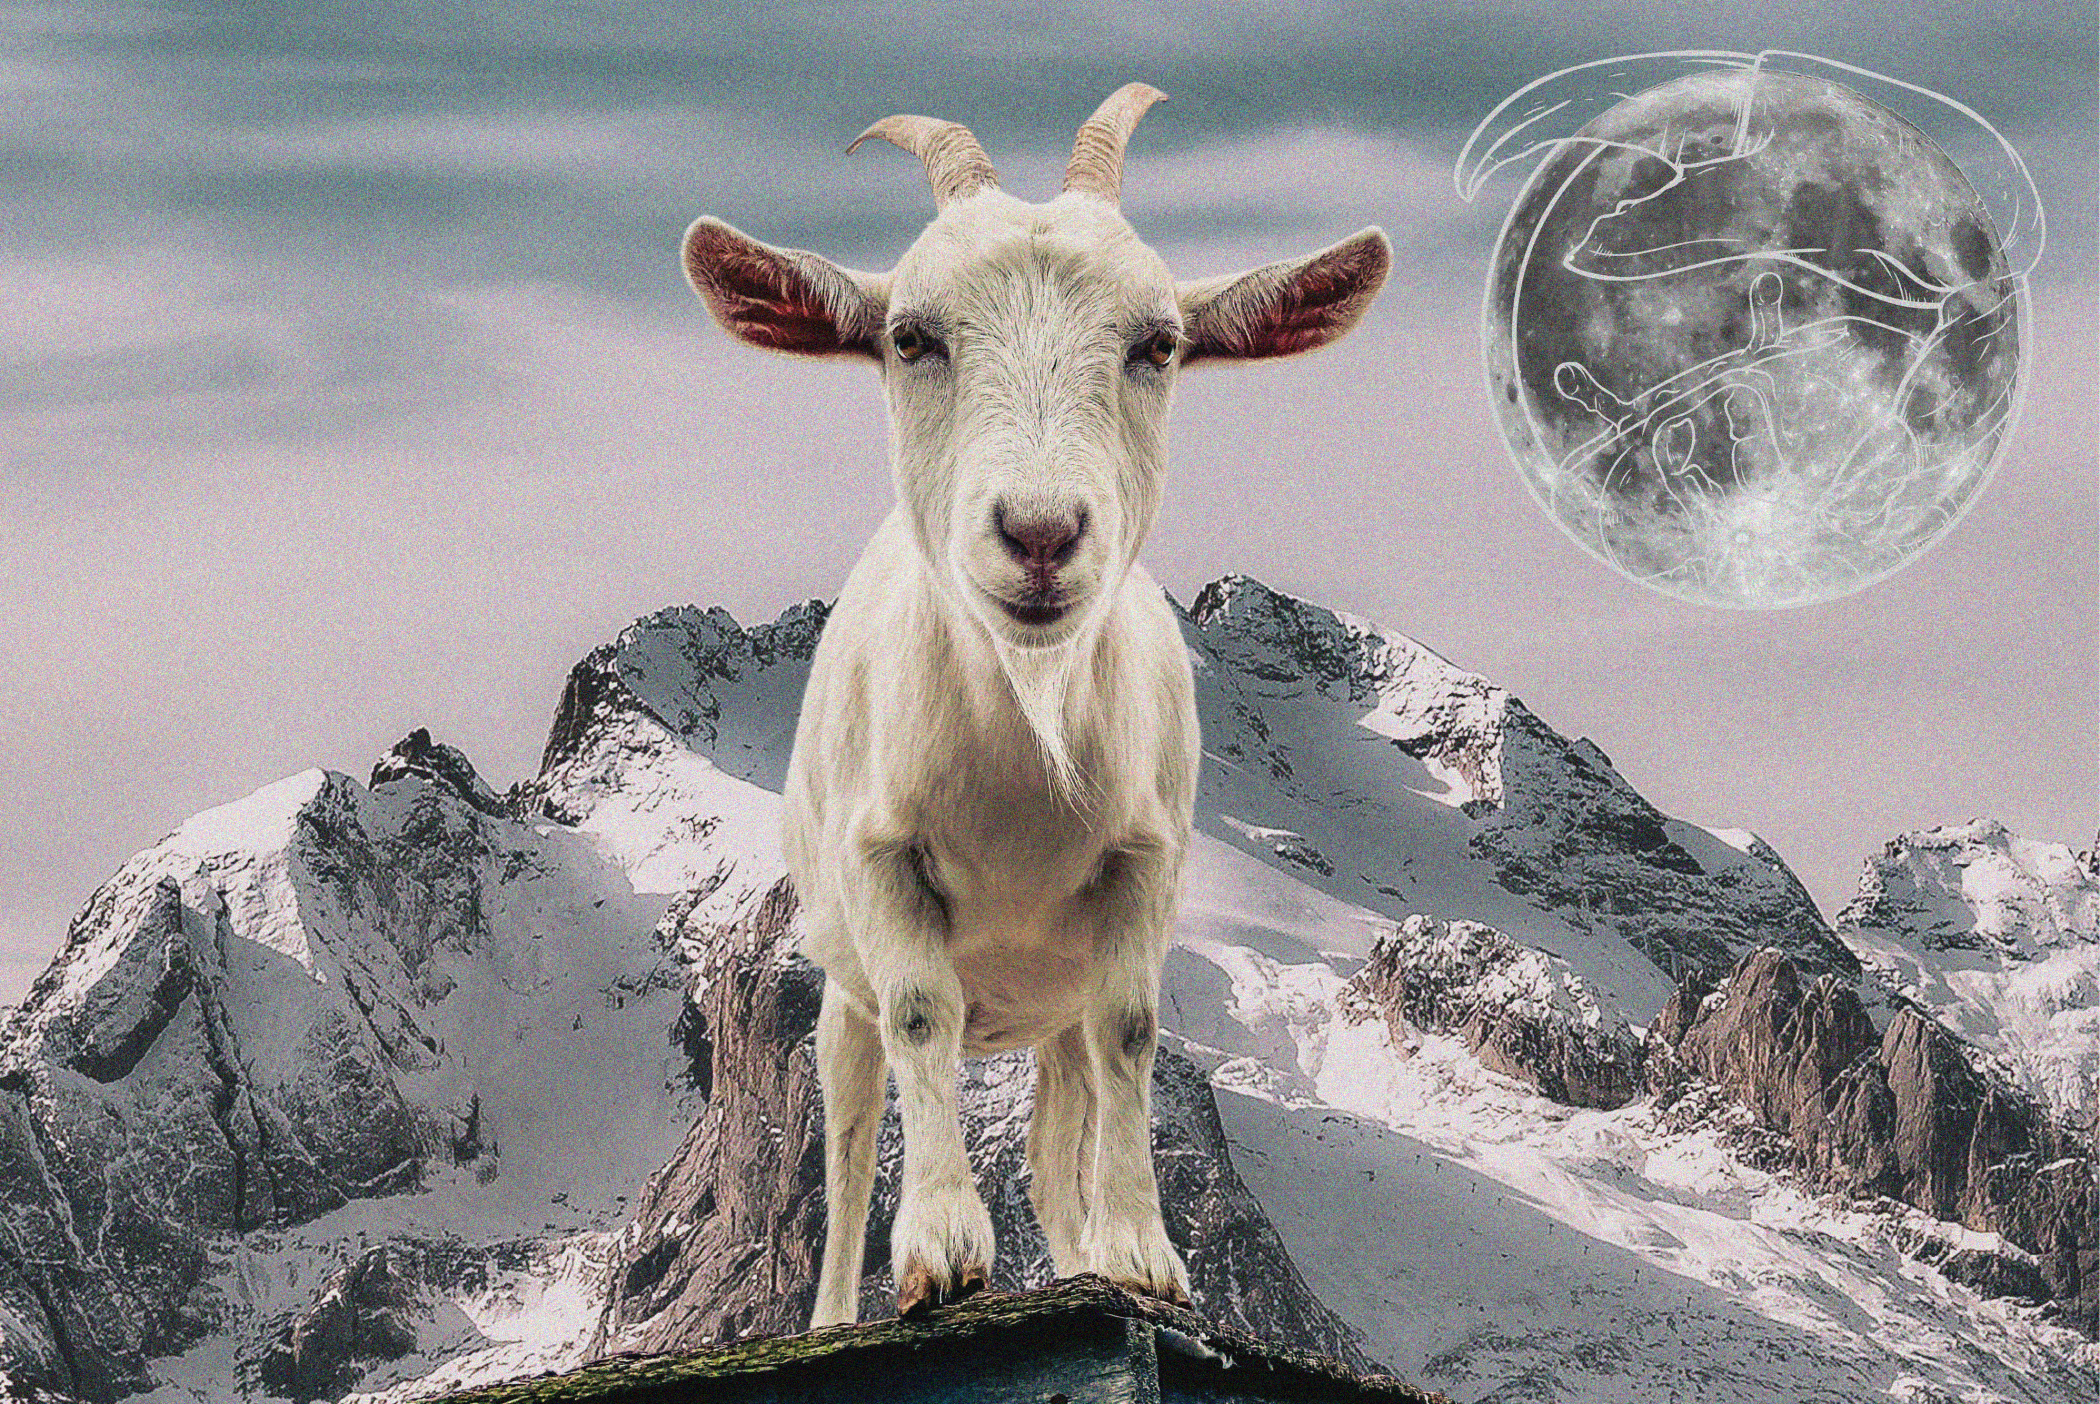 Goat on mountain with full moon in background